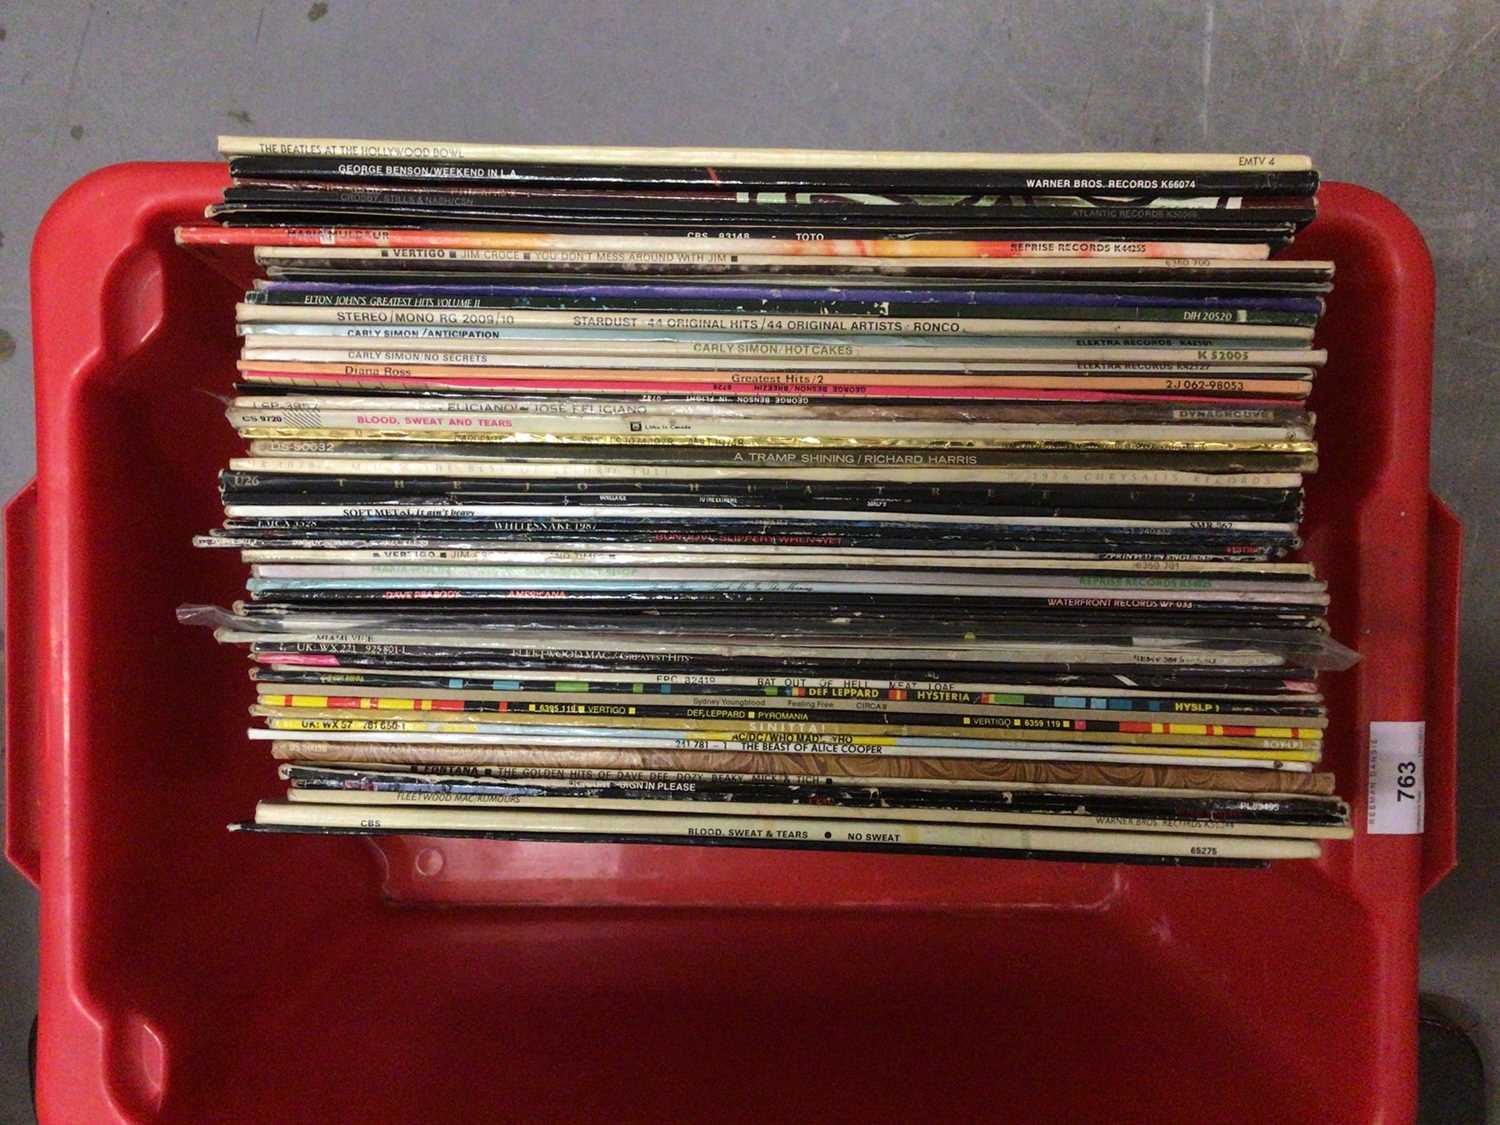 LP records including The Beatles, AC/DC, Alice Cooper and Carly Simon - Image 2 of 6